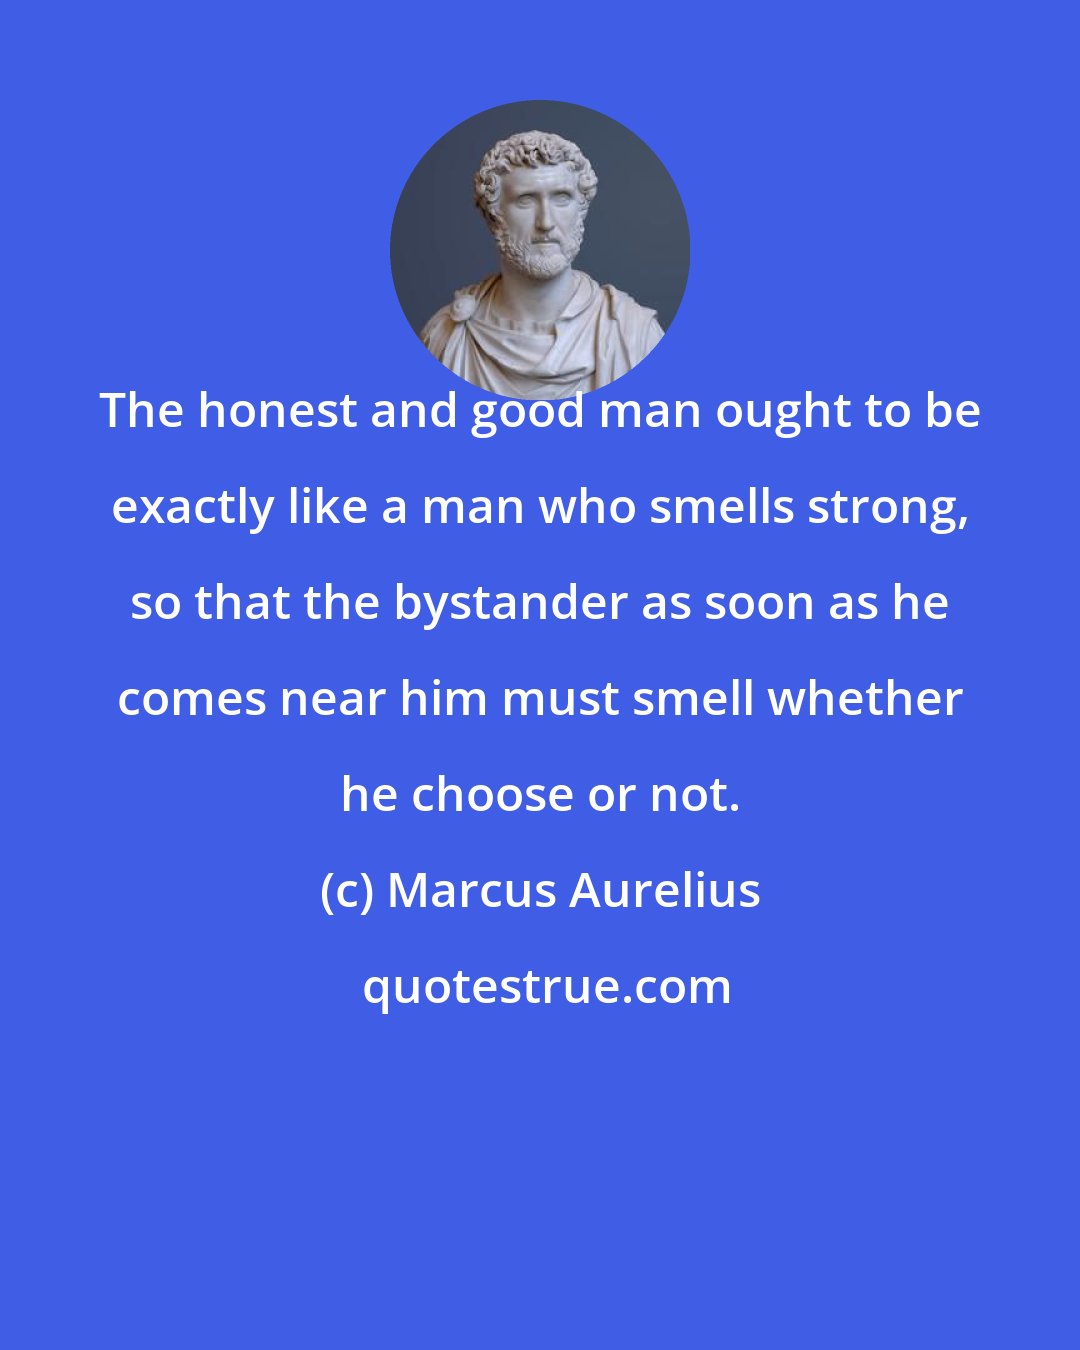 Marcus Aurelius: The honest and good man ought to be exactly like a man who smells strong, so that the bystander as soon as he comes near him must smell whether he choose or not.